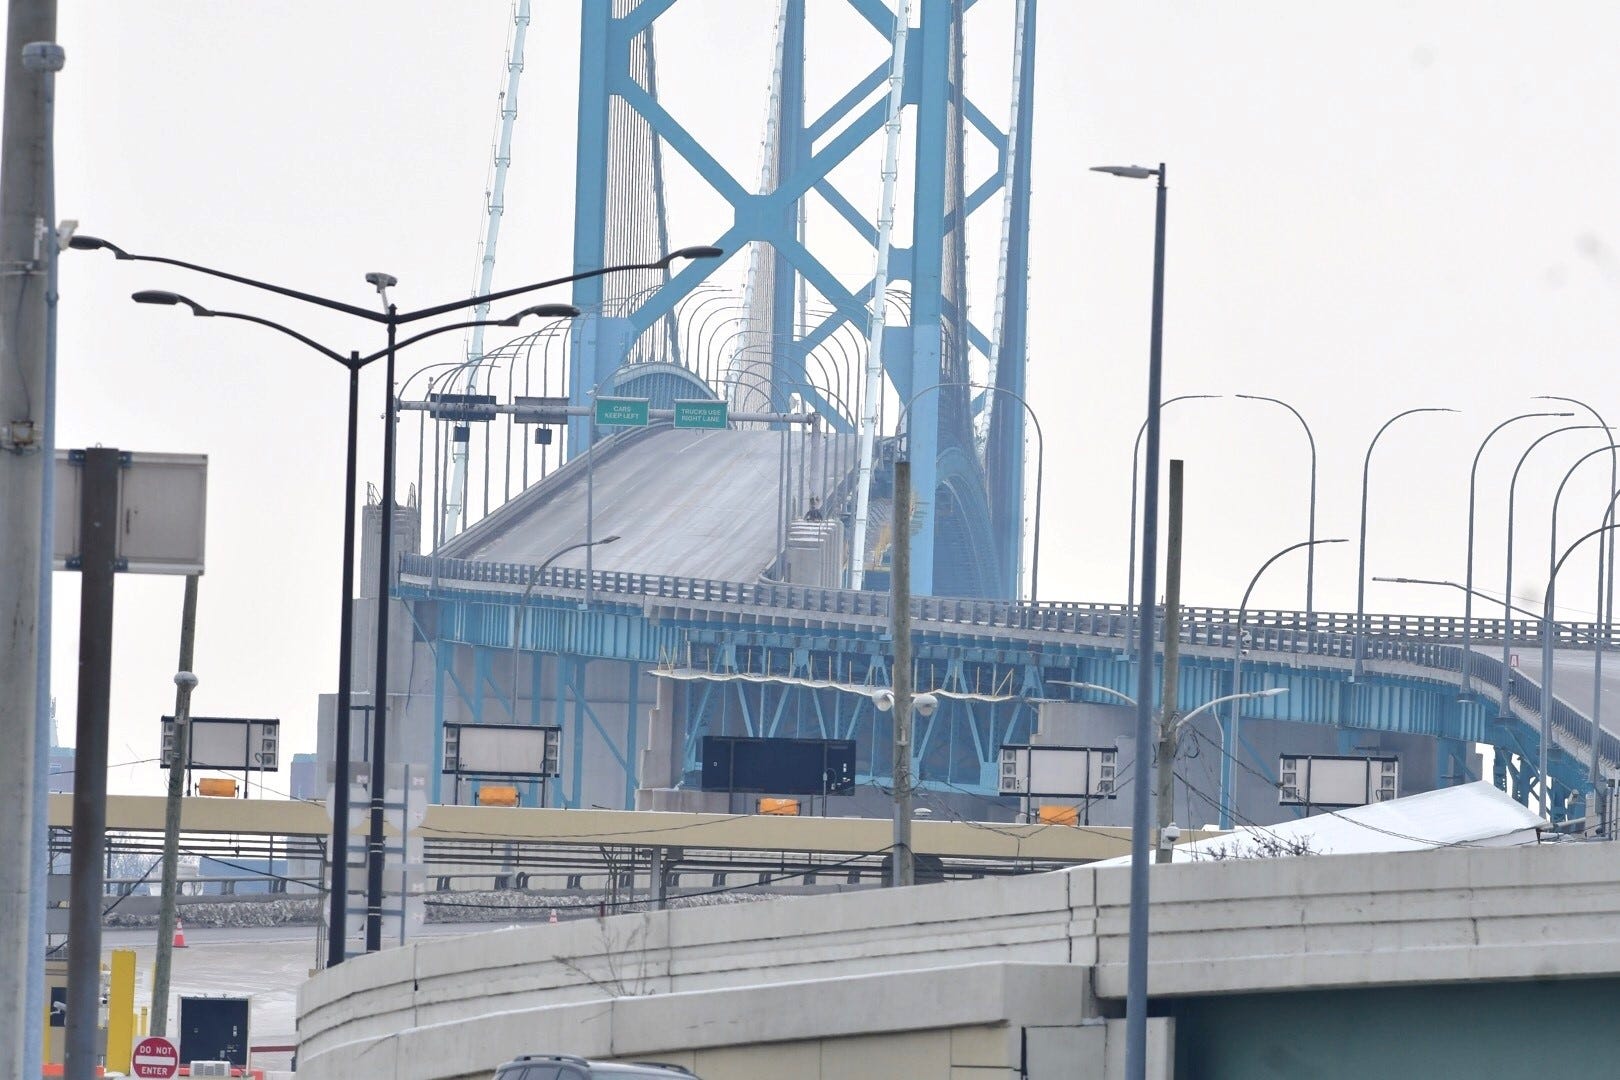 No traffic on the Ambassador Bridge as passage is closed on Tuesday, February 8, 2022.